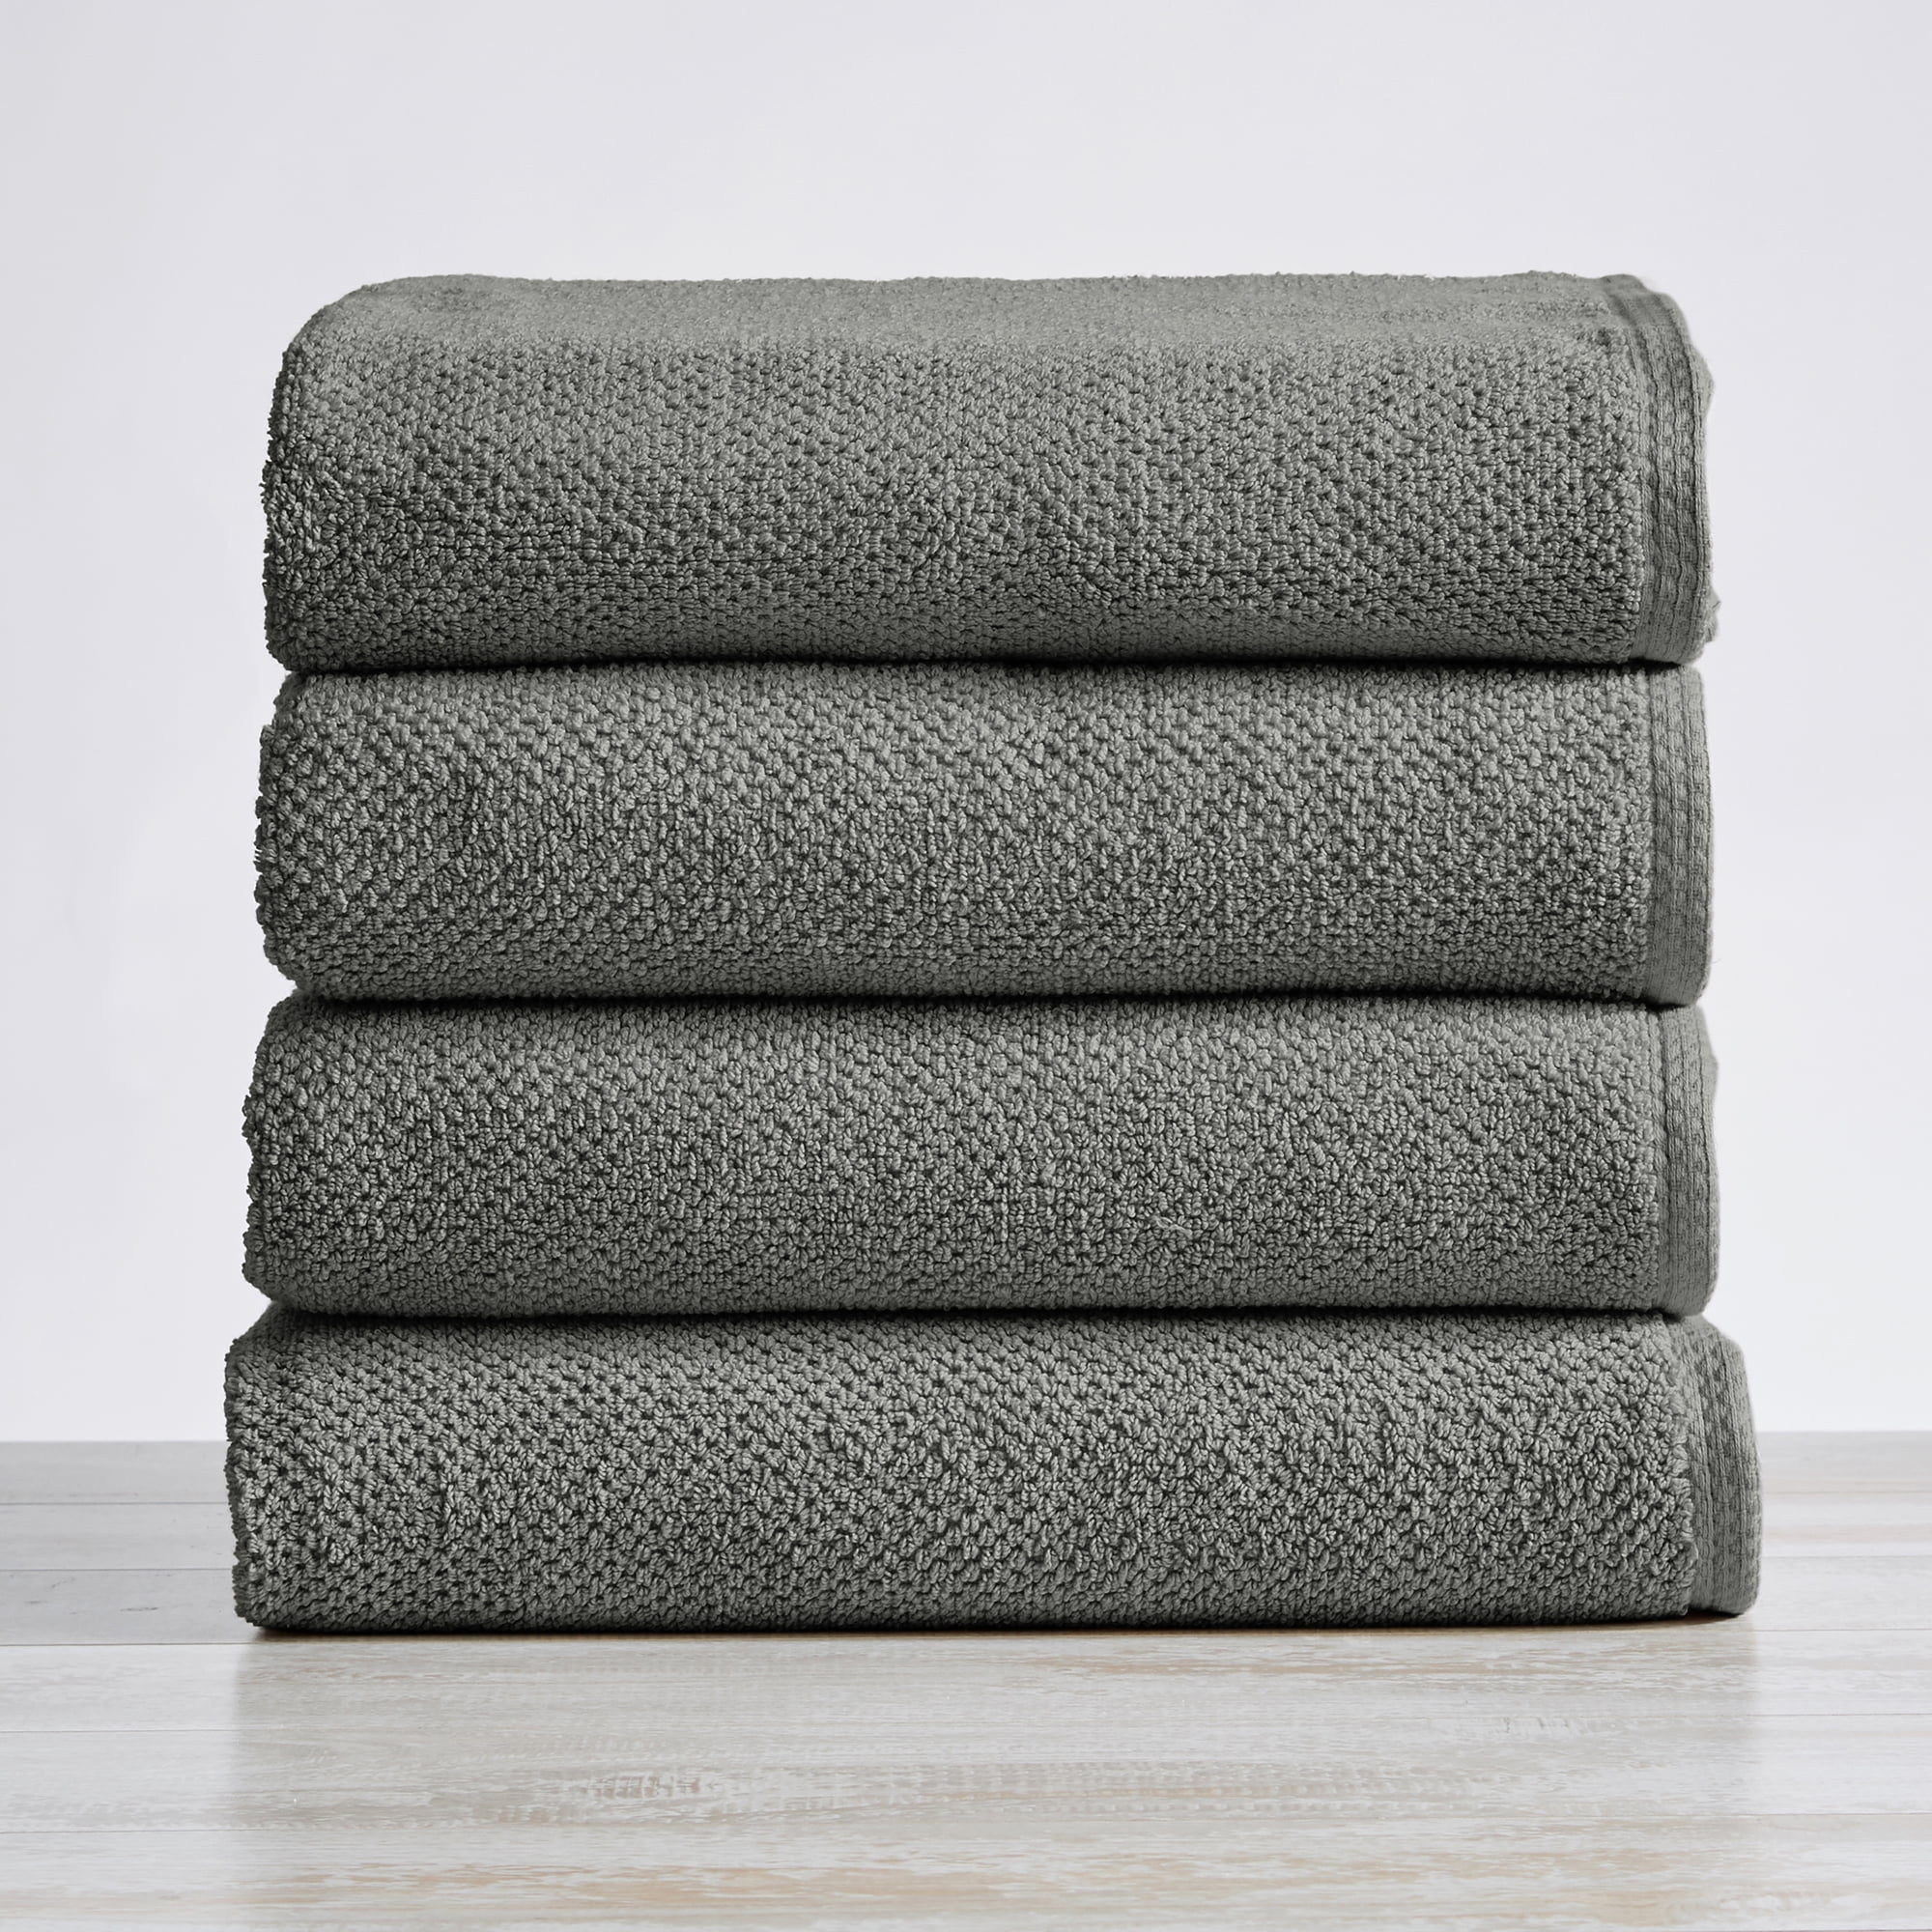 100% Cotton GRAY POPCORN BATH TOWELS - (4 Pack) - The Clean Store